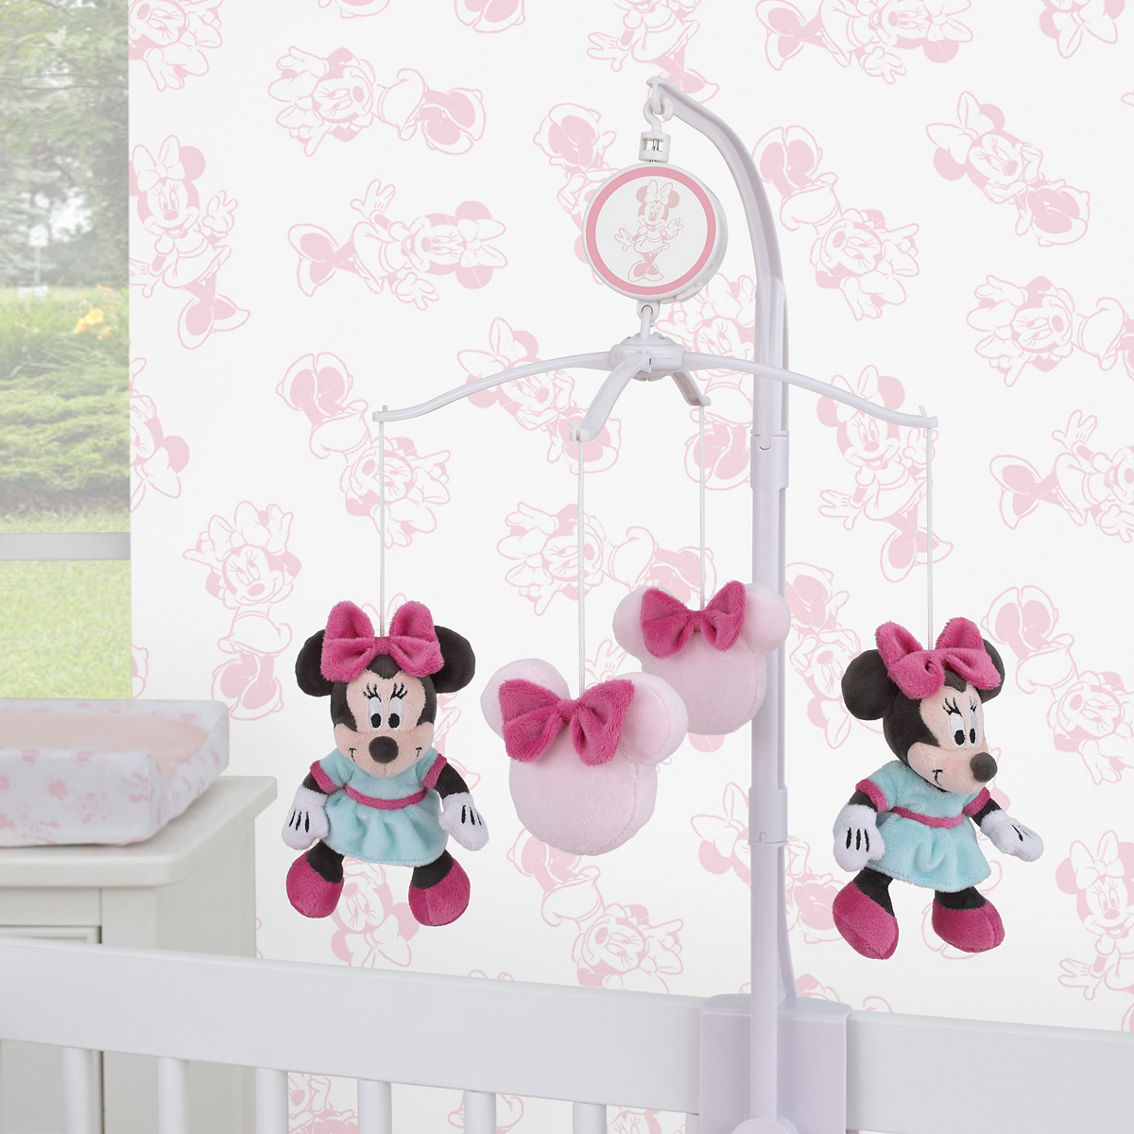 Disney Minnie Mouse Be Happy Pink and Aqua Plush Musical Mobile - Image 2 of 4